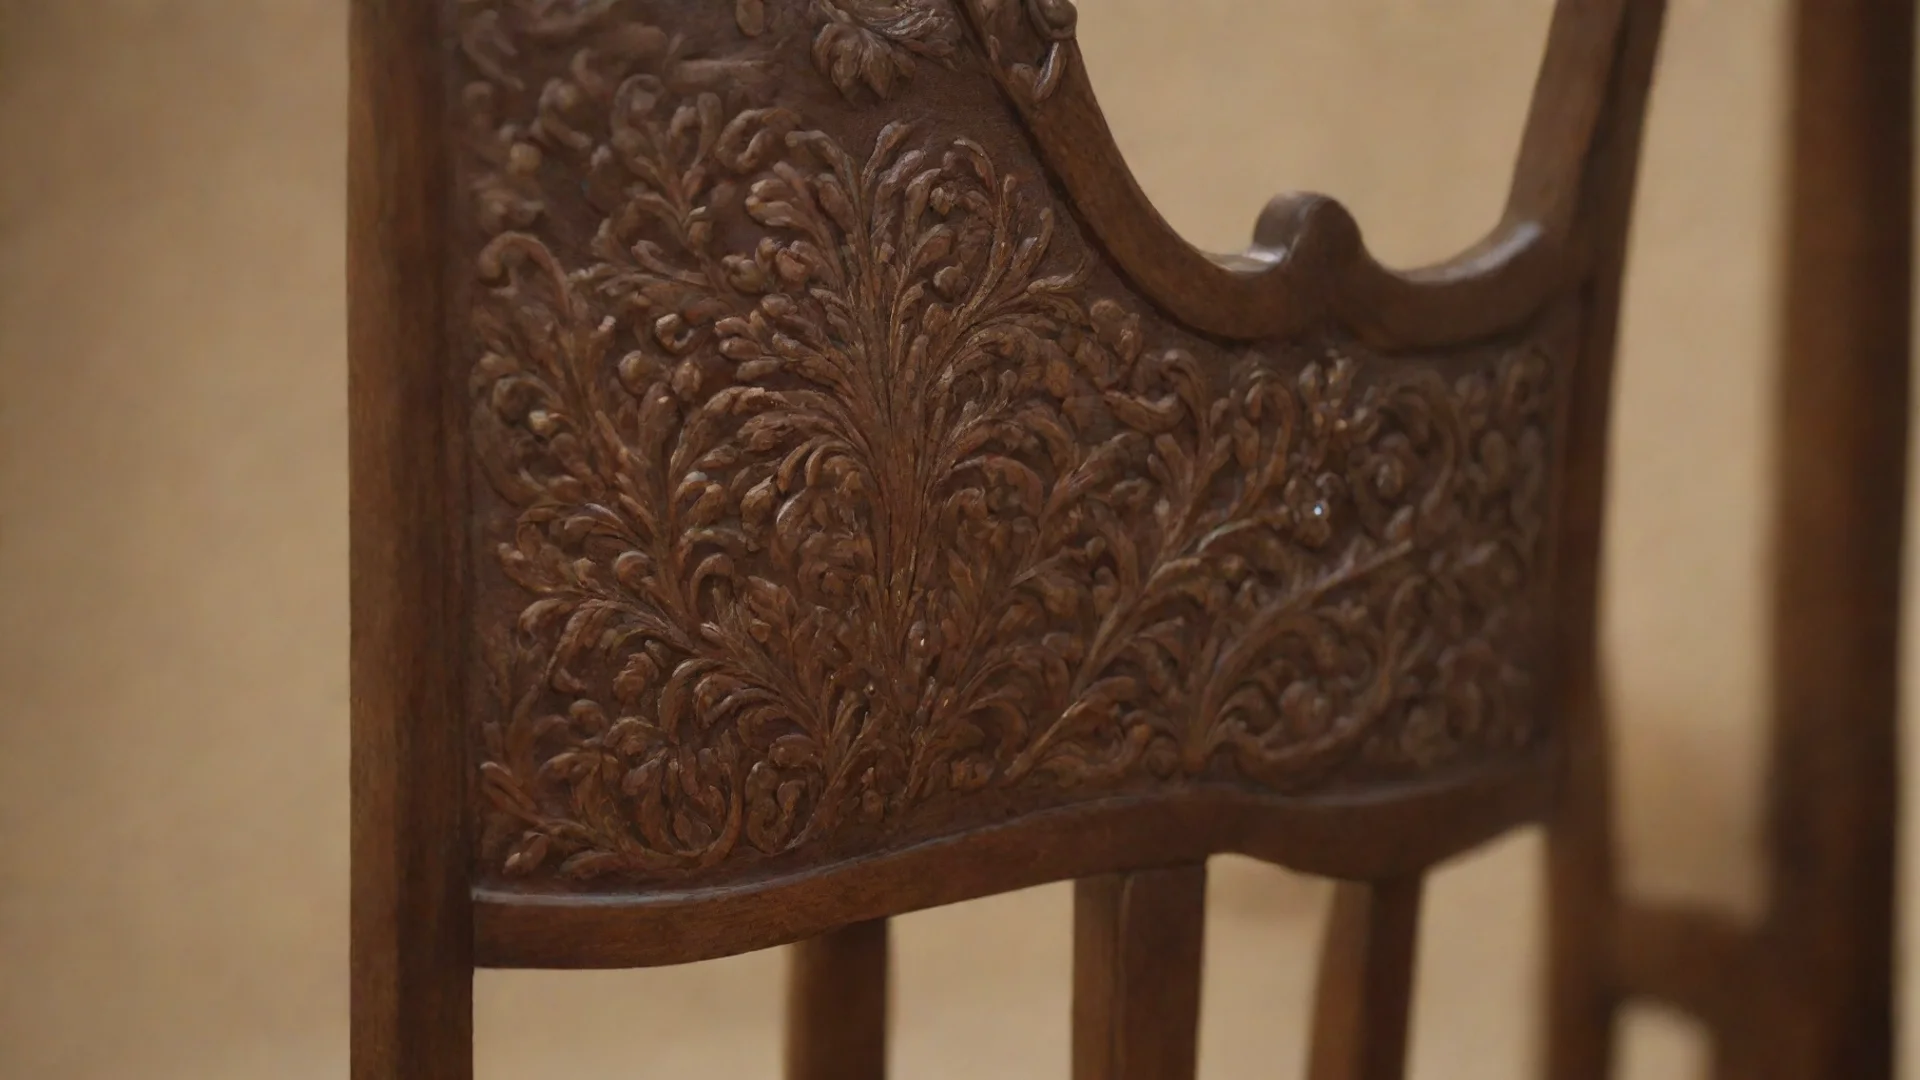 amazing detail view of a decorated chair back dark brown at the edge blurred with high craftsmanship awesome portrait 2 hdwidescreen